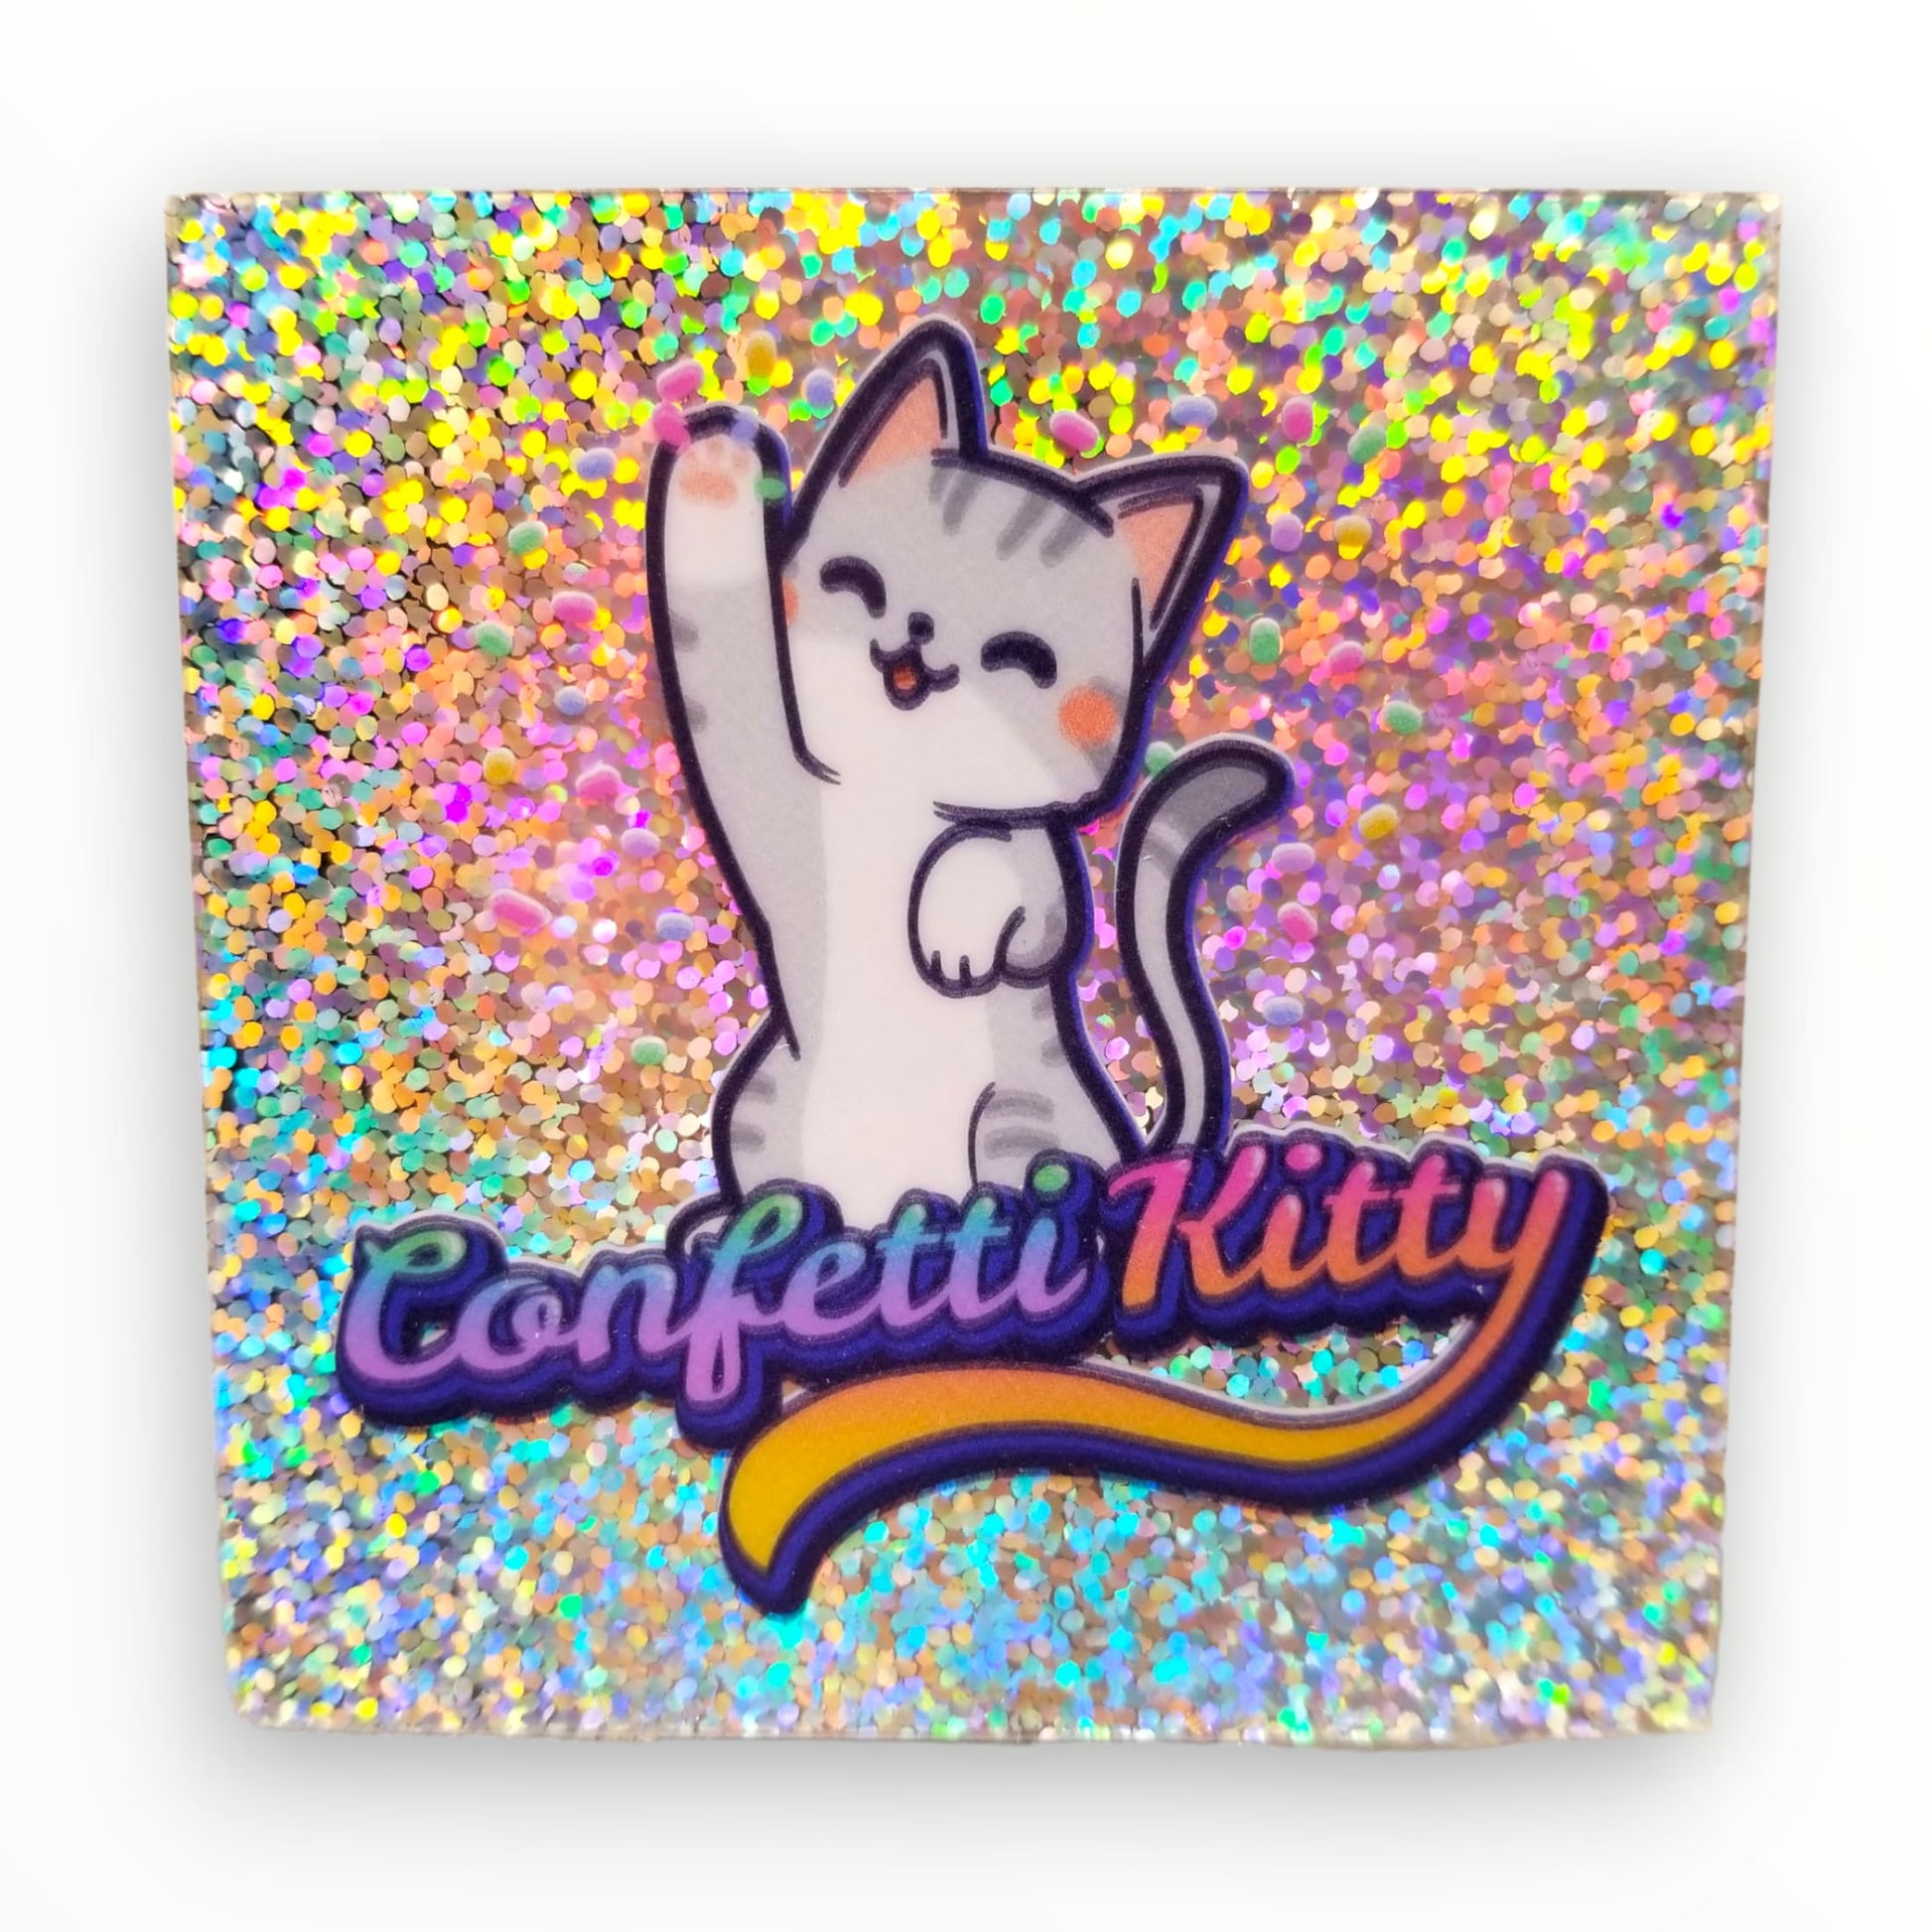 Exclusive! Confetti Kitty Glitter Sticker from Confetti Kitty, Only 5